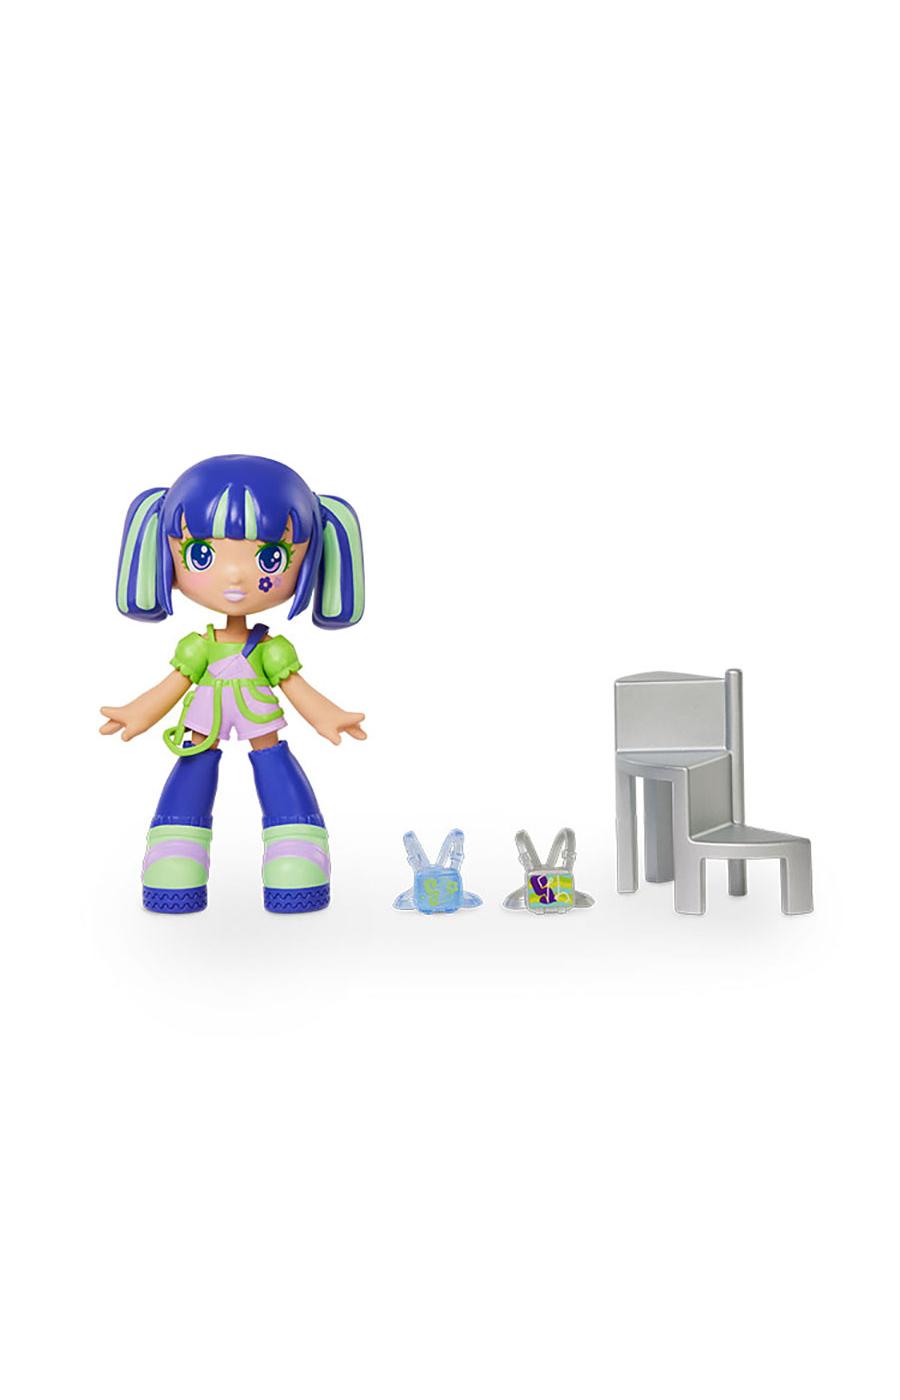 Squadz Place Tokyo Trends Collectible Doll; image 5 of 11